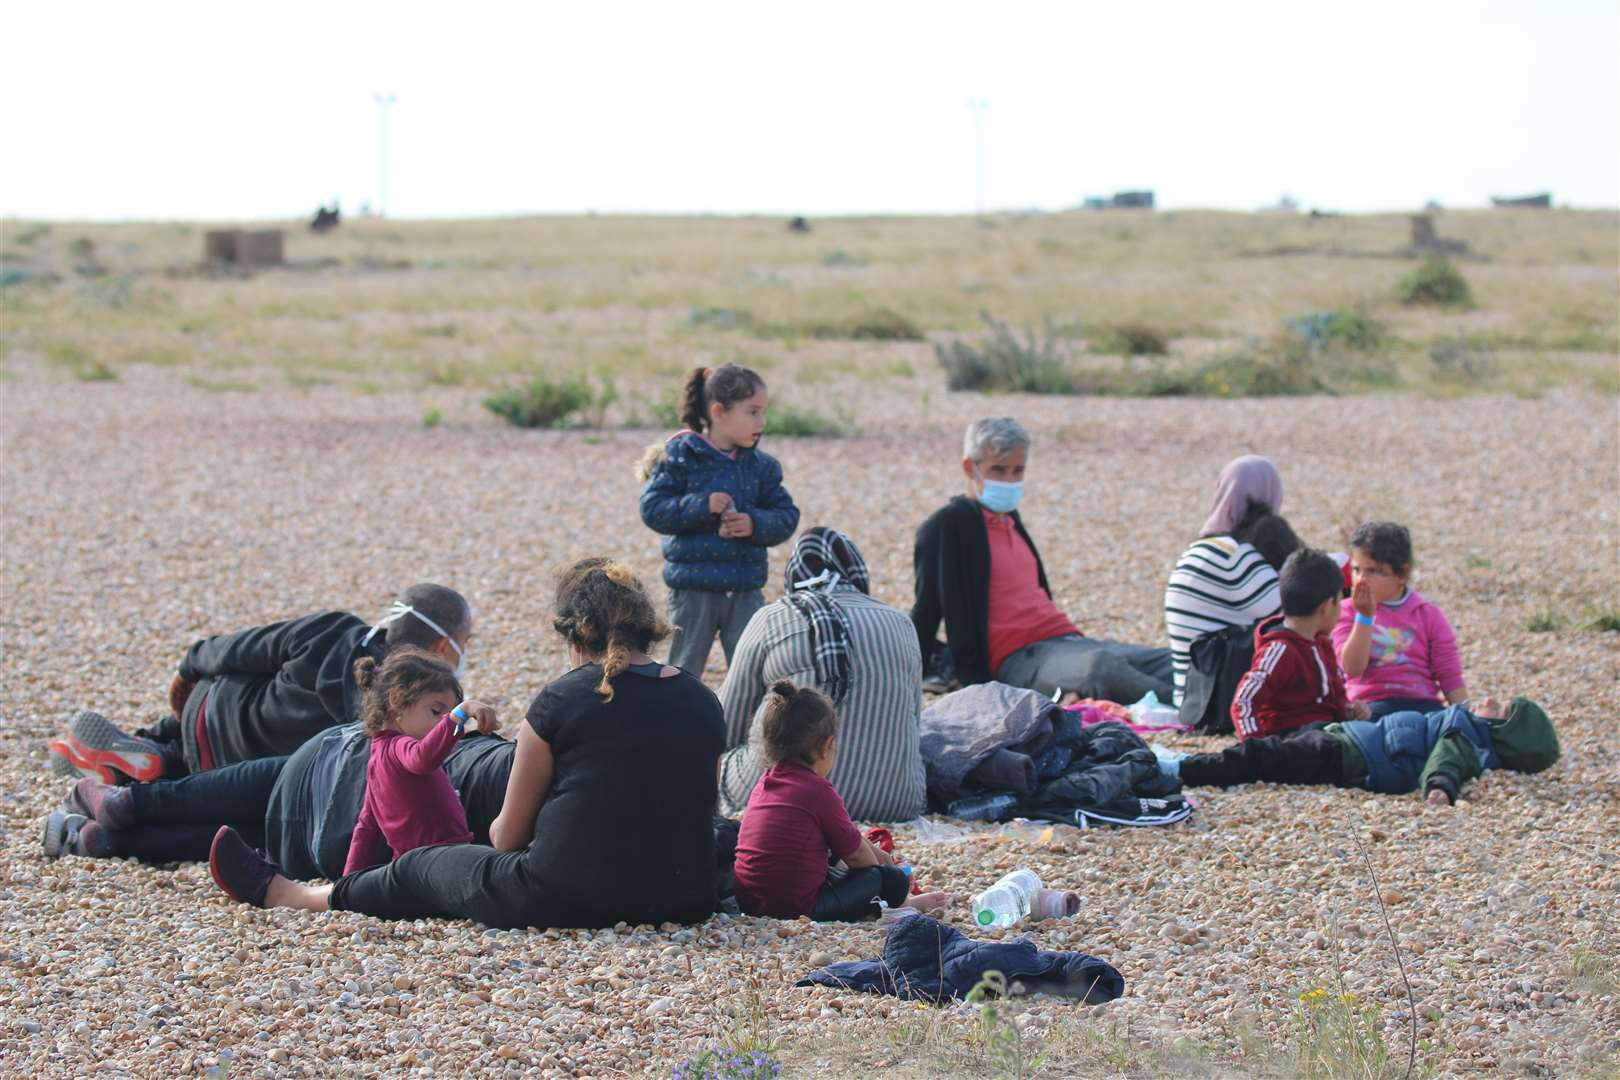 Men, women and children were among the number of asylum seekers who arrived at Dungeness beach on Monday. Picture from August last year. Credit: Susan Pilcher